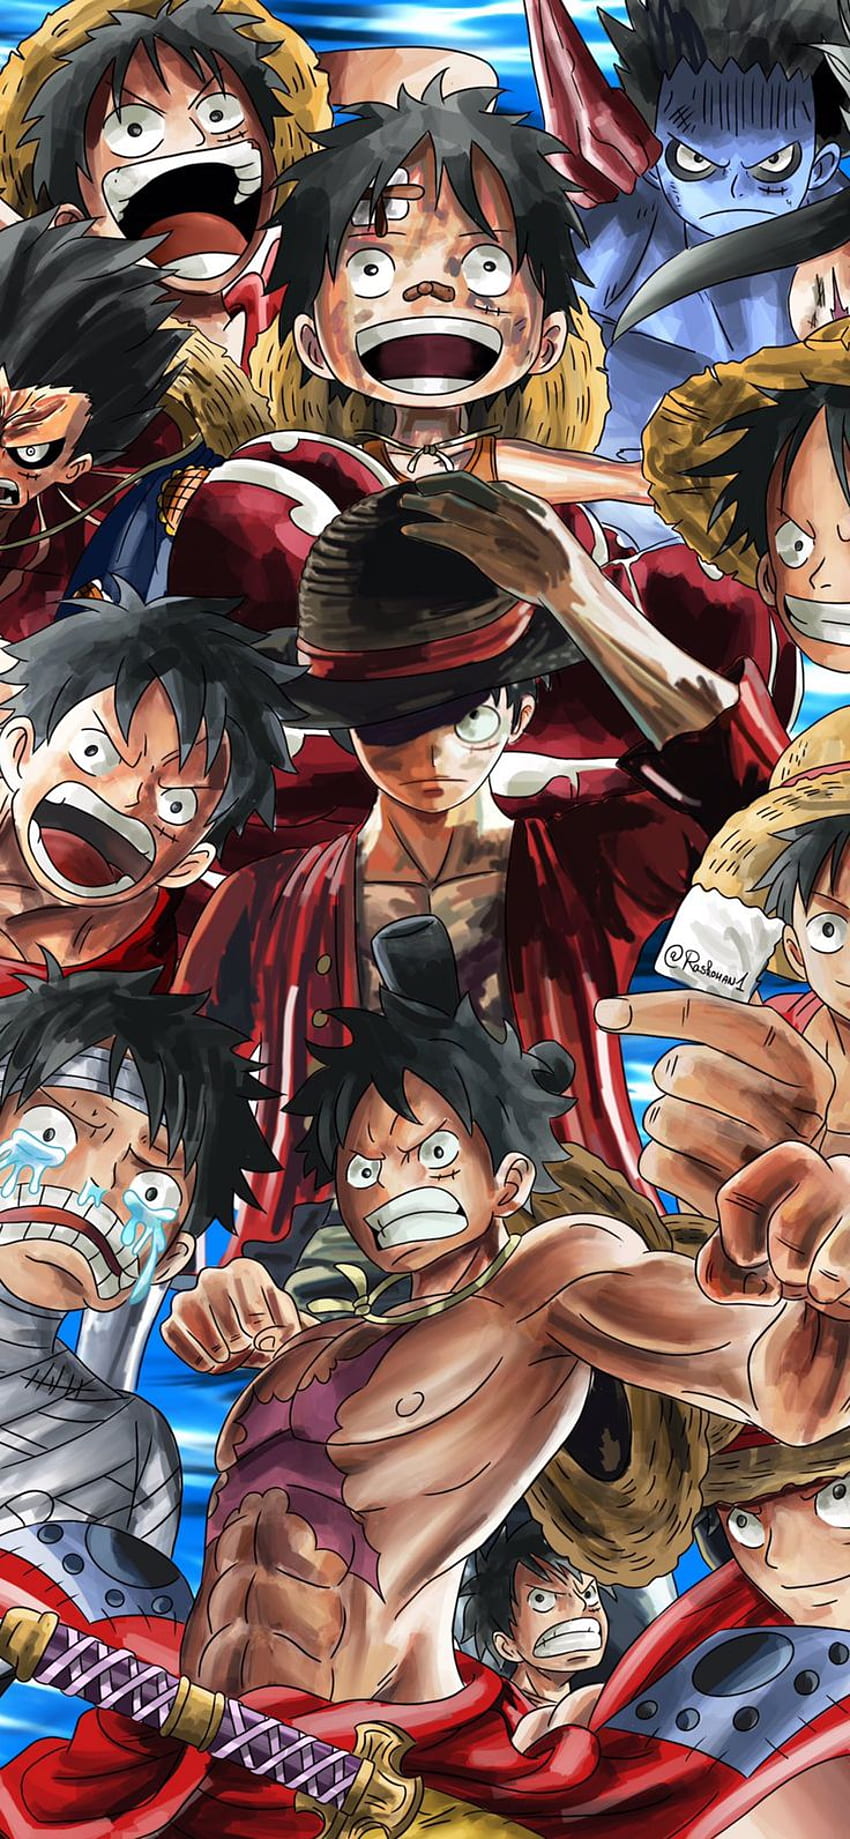 Luffy Color Drawing From One Piece Anime, Painting by Celeste Skyhawer |  Artmajeur